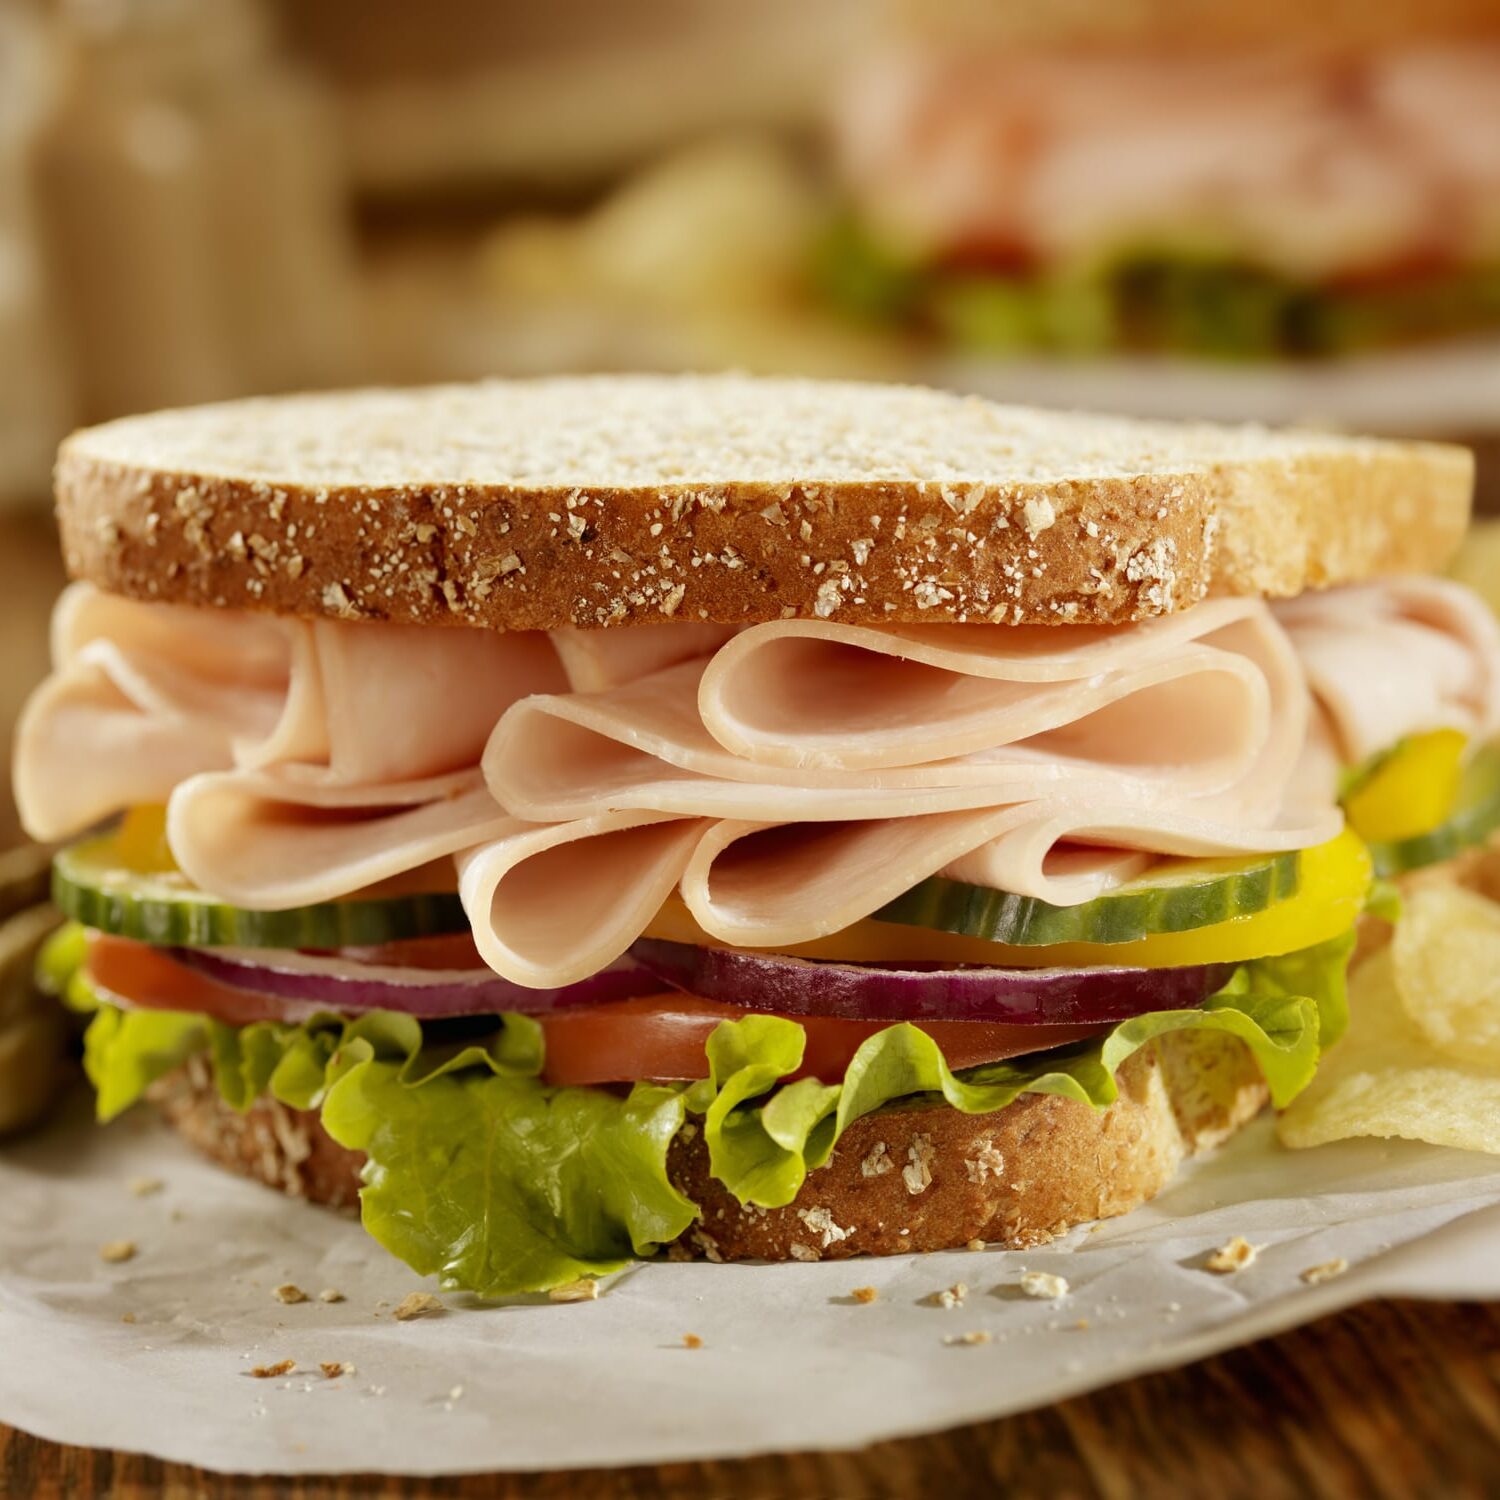 "Smoked Turkey Sandwich on Whole Grain Bread with Lettuce, Tomatoes, Cucumbers, Red Onions, Yellow Peppers and Potato Chips on the Side- Photographed on Hasselblad H3D2-39mb Camera"